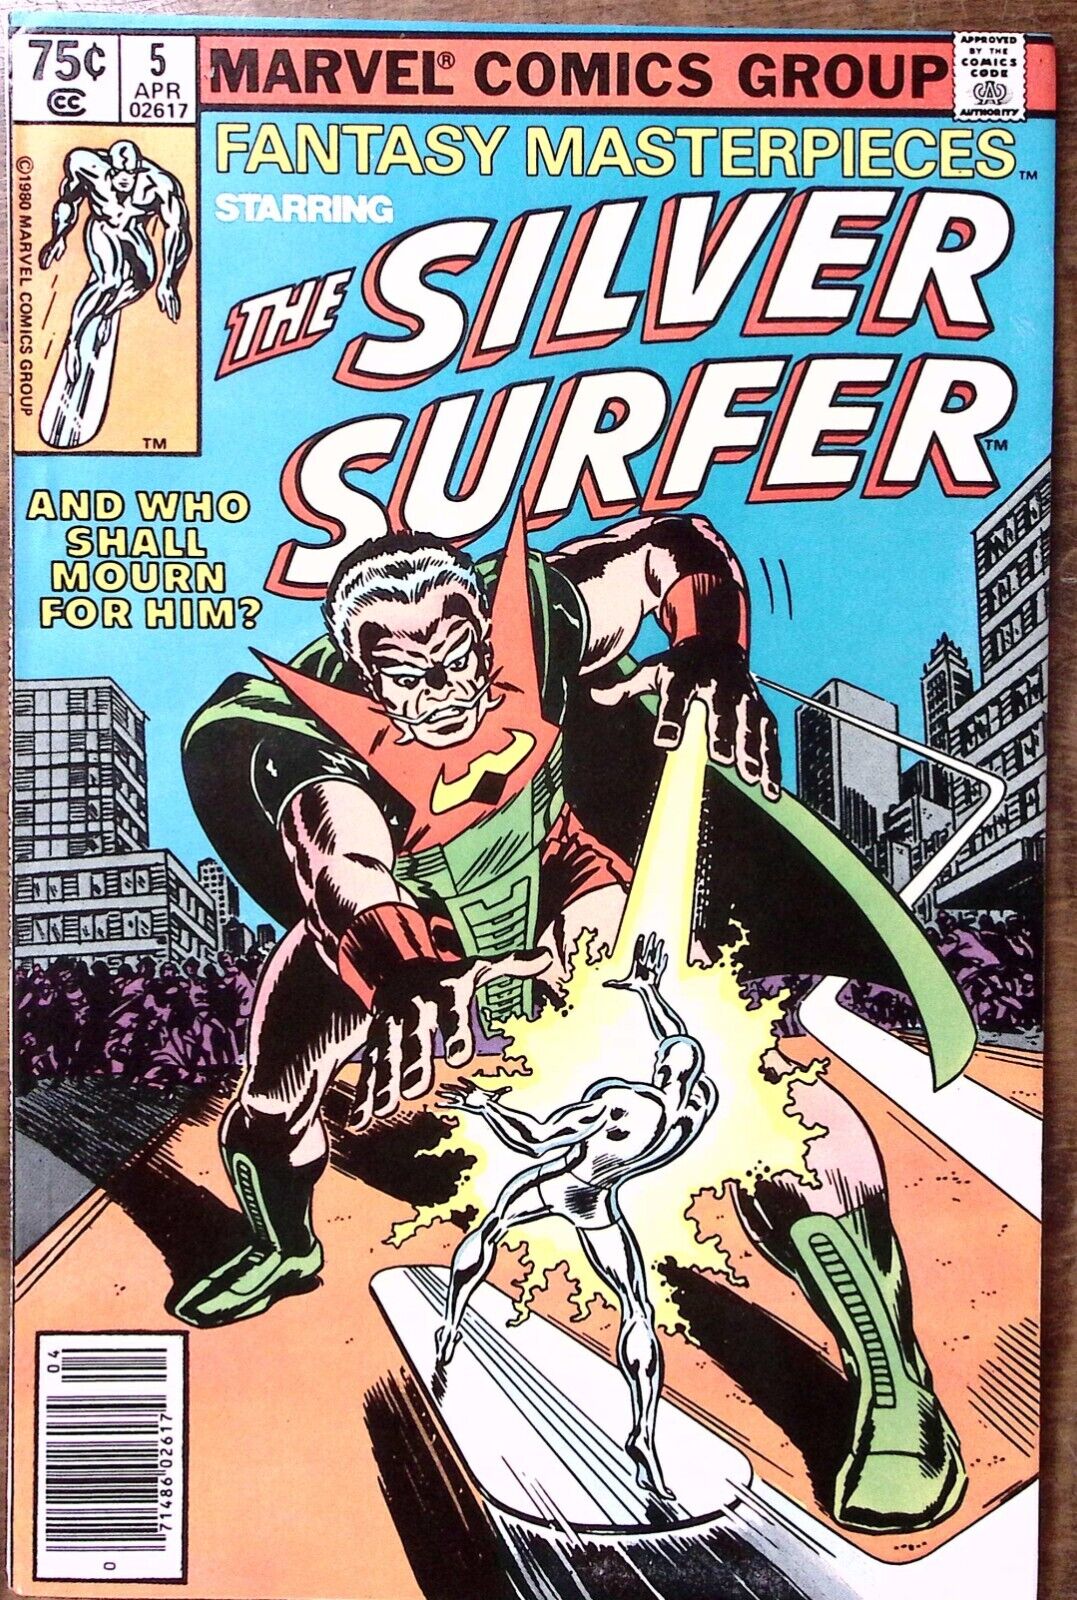 1980 MARVEL FANTASY MASTERPIECES #5 APR THE SILVER SURFER WHO SHALL MOURN Z4893